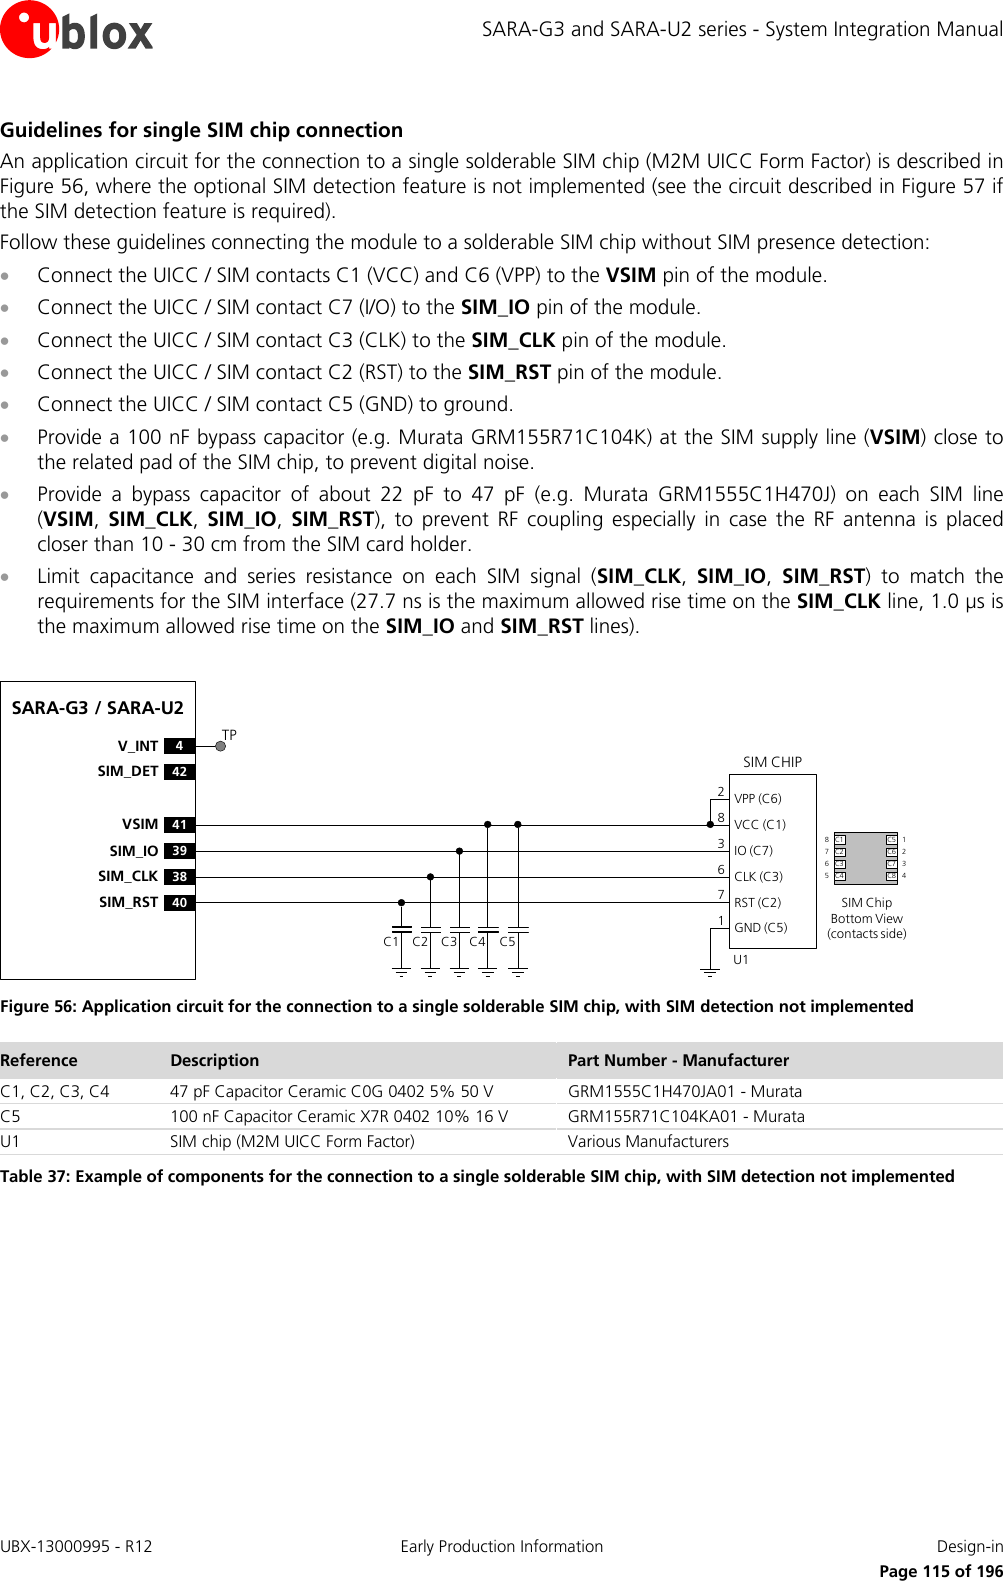 SARA-G3 and SARA-U2 series - System Integration Manual Guidelines for single SIM chip connection An application circuit for the connection to a single solderable SIM chip (M2M UICC Form Factor) is described in Figure 56, where the optional SIM detection feature is not implemented (see the circuit described in Figure 57 if the SIM detection feature is required). Follow these guidelines connecting the module to a solderable SIM chip without SIM presence detection: • Connect the UICC / SIM contacts C1 (VCC) and C6 (VPP) to the VSIM pin of the module. • Connect the UICC / SIM contact C7 (I/O) to the SIM_IO pin of the module. • Connect the UICC / SIM contact C3 (CLK) to the SIM_CLK pin of the module. • Connect the UICC / SIM contact C2 (RST) to the SIM_RST pin of the module. • Connect the UICC / SIM contact C5 (GND) to ground. • Provide a 100 nF bypass capacitor (e.g. Murata GRM155R71C104K) at the SIM supply line (VSIM) close to the related pad of the SIM chip, to prevent digital noise.  • Provide a bypass capacitor of about 22 pF to 47 pF (e.g. Murata GRM1555C1H470J) on each SIM line (VSIM,  SIM_CLK,  SIM_IO,  SIM_RST), to prevent RF coupling especially in case the RF antenna is placed closer than 10 - 30 cm from the SIM card holder. • Limit capacitance and series resistance on each SIM signal (SIM_CLK,  SIM_IO,  SIM_RST)  to match the requirements for the SIM interface (27.7 ns is the maximum allowed rise time on the SIM_CLK line, 1.0 µs is the maximum allowed rise time on the SIM_IO and SIM_RST lines).  41VSIM39SIM_IO38SIM_CLK40SIM_RST4V_INT42SIM_DET SIM CHIPSIM ChipBottom View (contacts side)C1VPP (C6)VCC (C1)IO (C7)CLK (C3)RST (C2)GND (C5)C2 C3 C5U1C4283671C1 C5C2 C6C3 C7C4 C887651234TPSARA-G3 / SARA-U2 Figure 56: Application circuit for the connection to a single solderable SIM chip, with SIM detection not implemented Reference Description Part Number - Manufacturer C1, C2, C3, C4 47 pF Capacitor Ceramic C0G 0402 5% 50 V GRM1555C1H470JA01 - Murata C5 100 nF Capacitor Ceramic X7R 0402 10% 16 V GRM155R71C104KA01 - Murata U1  SIM chip (M2M UICC Form Factor) Various Manufacturers Table 37: Example of components for the connection to a single solderable SIM chip, with SIM detection not implemented  UBX-13000995 - R12 Early Production Information Design-in     Page 115 of 196 